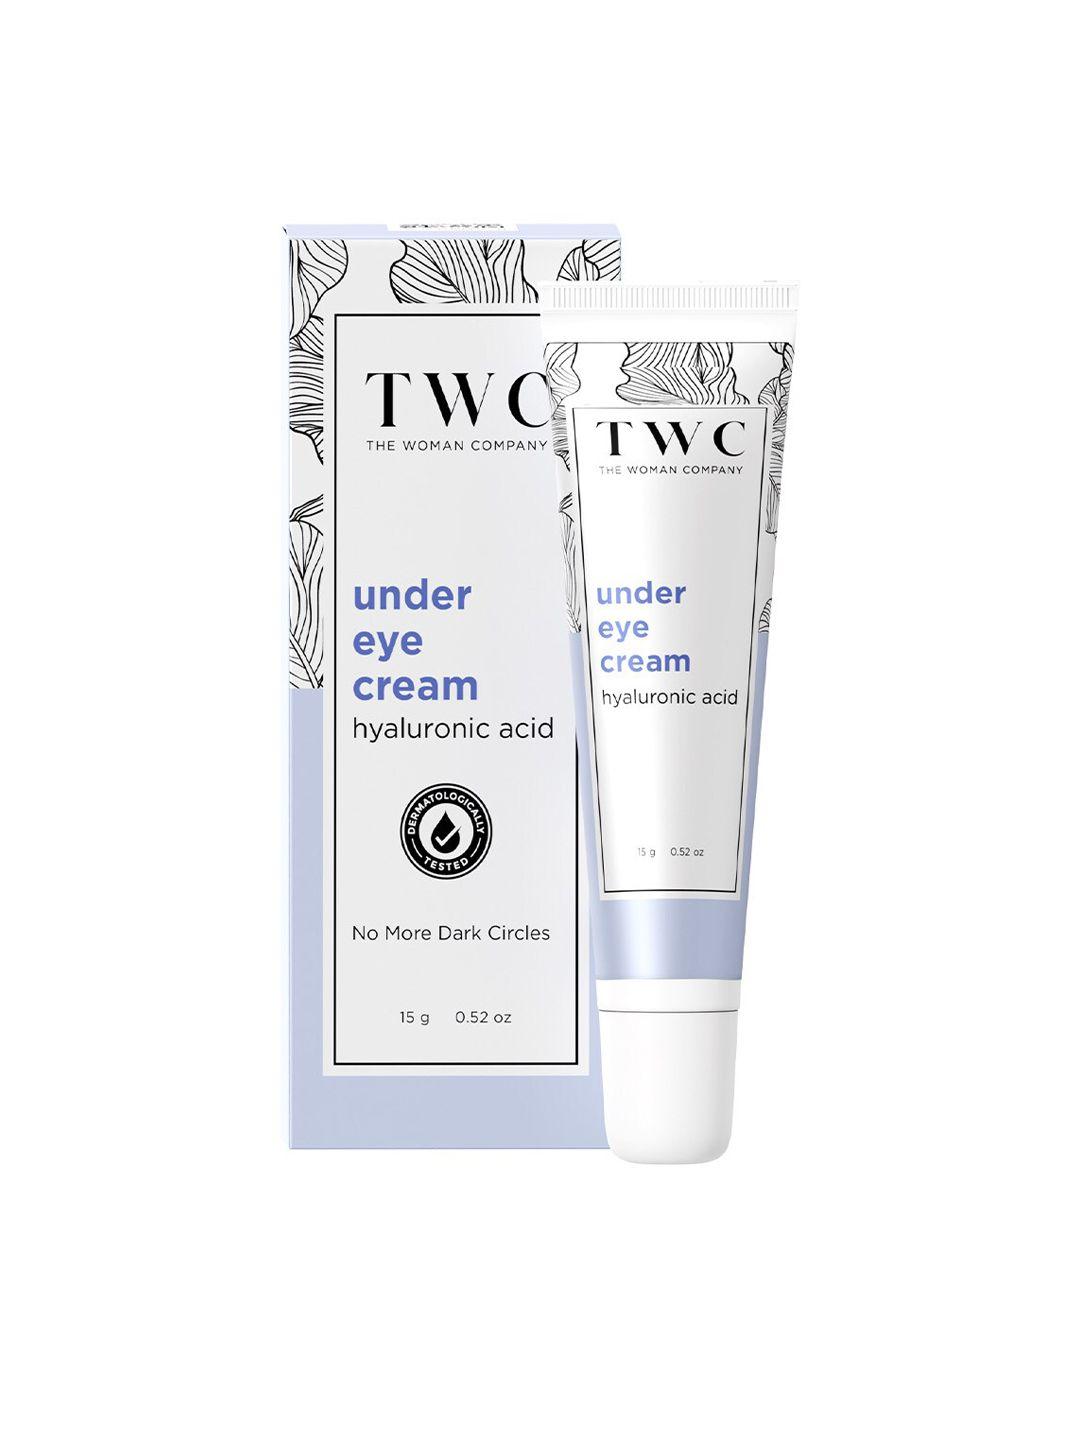 the woman company under eye cream with hyaluronic acid for dark circles & fine lines- 15g